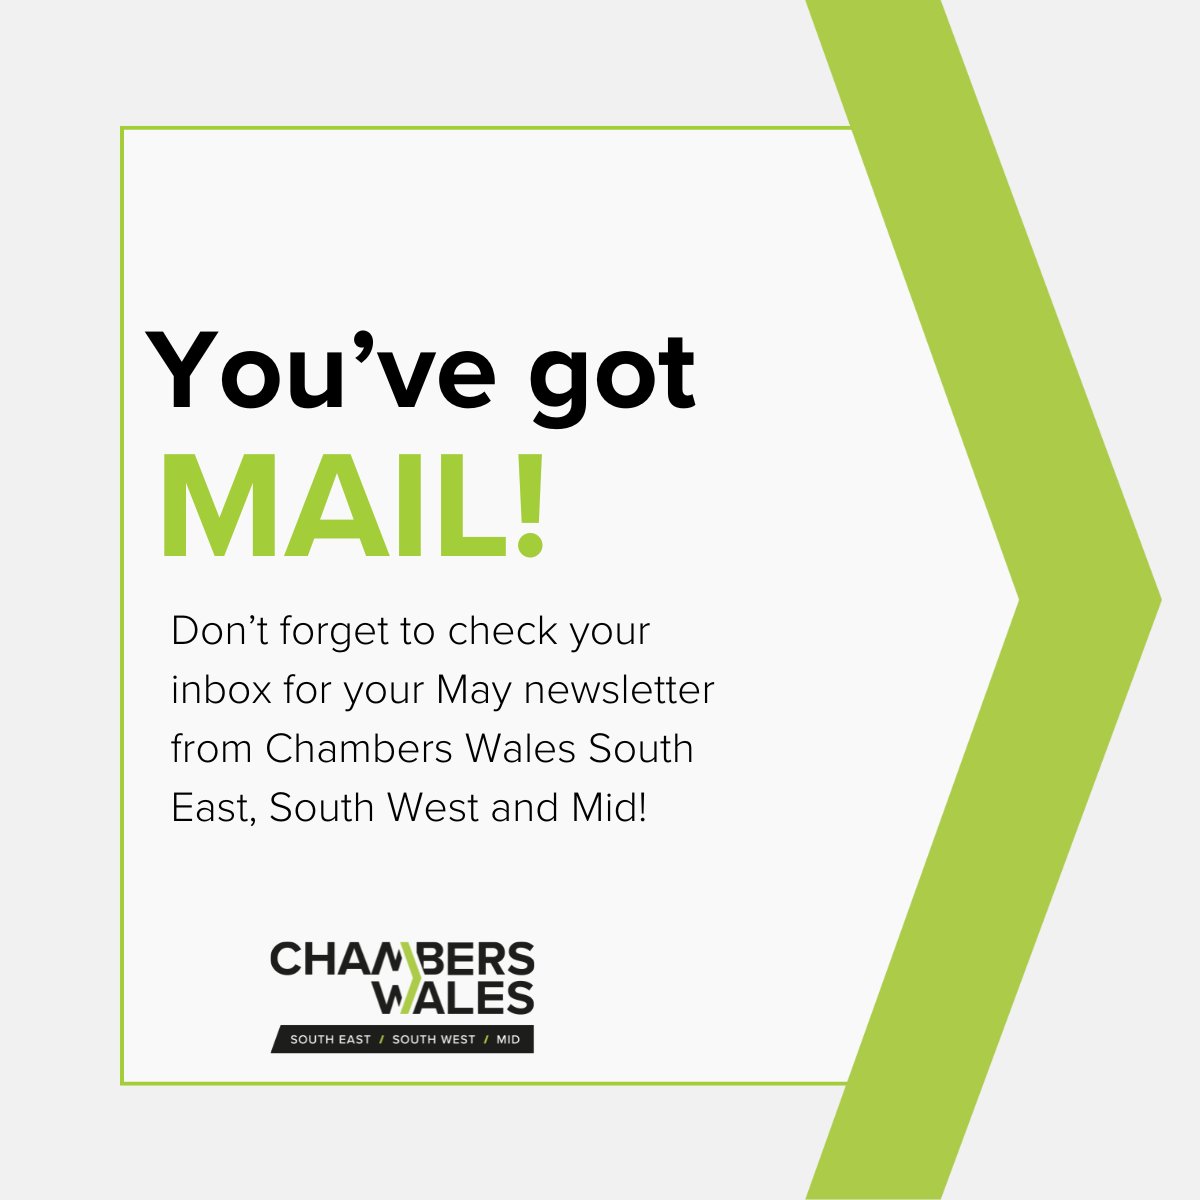 Have you read our May newsletter? Check your inbox for your latest newsletter from Chambers Wales South East, South West and Mid! 📧